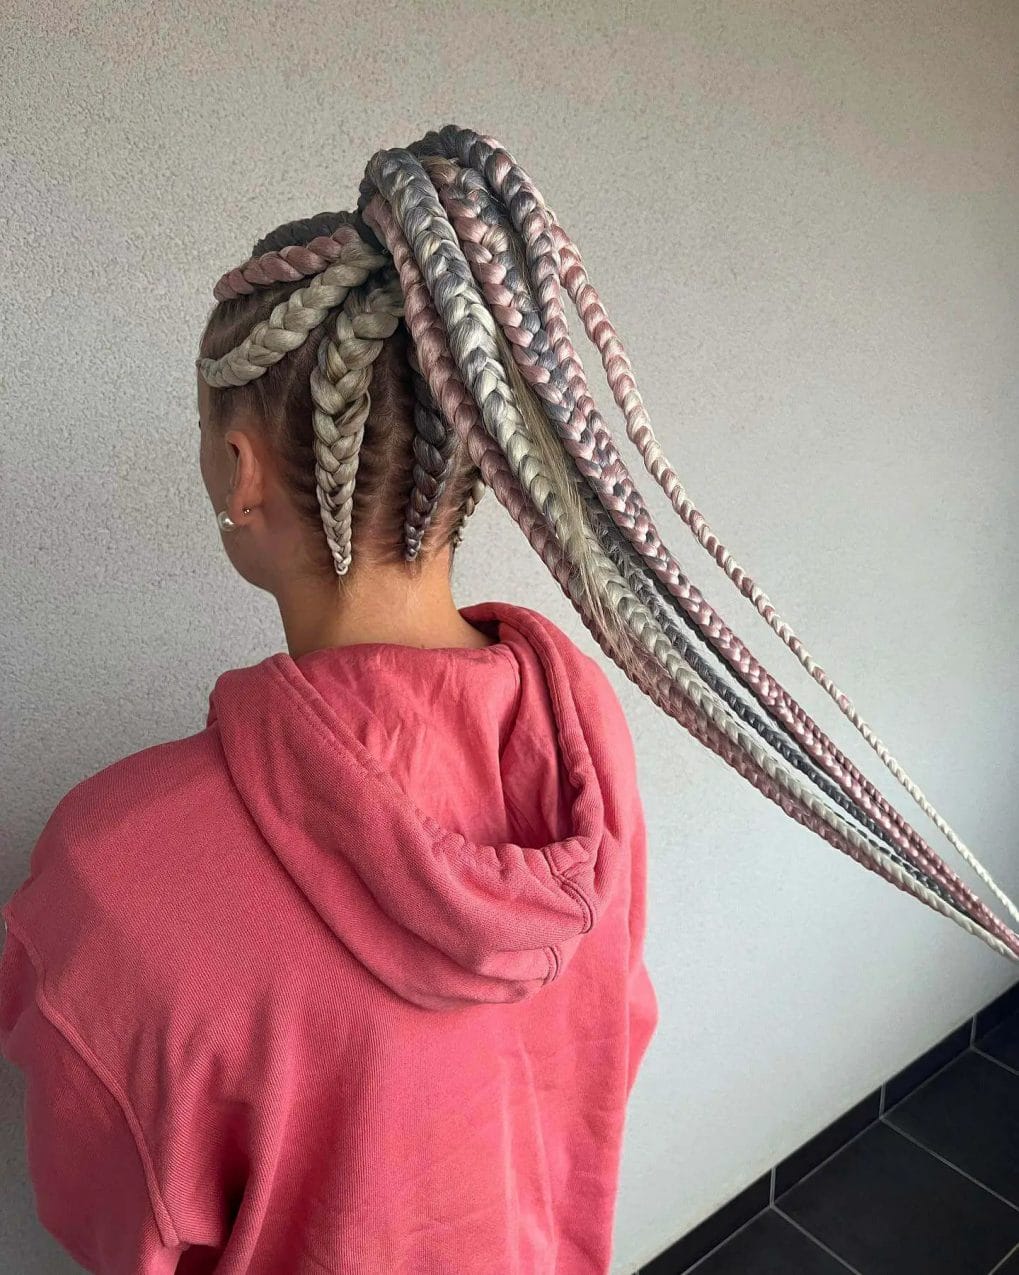 Multiple long braids in silvery grey and pastel pink as a ponytail, intricately woven.